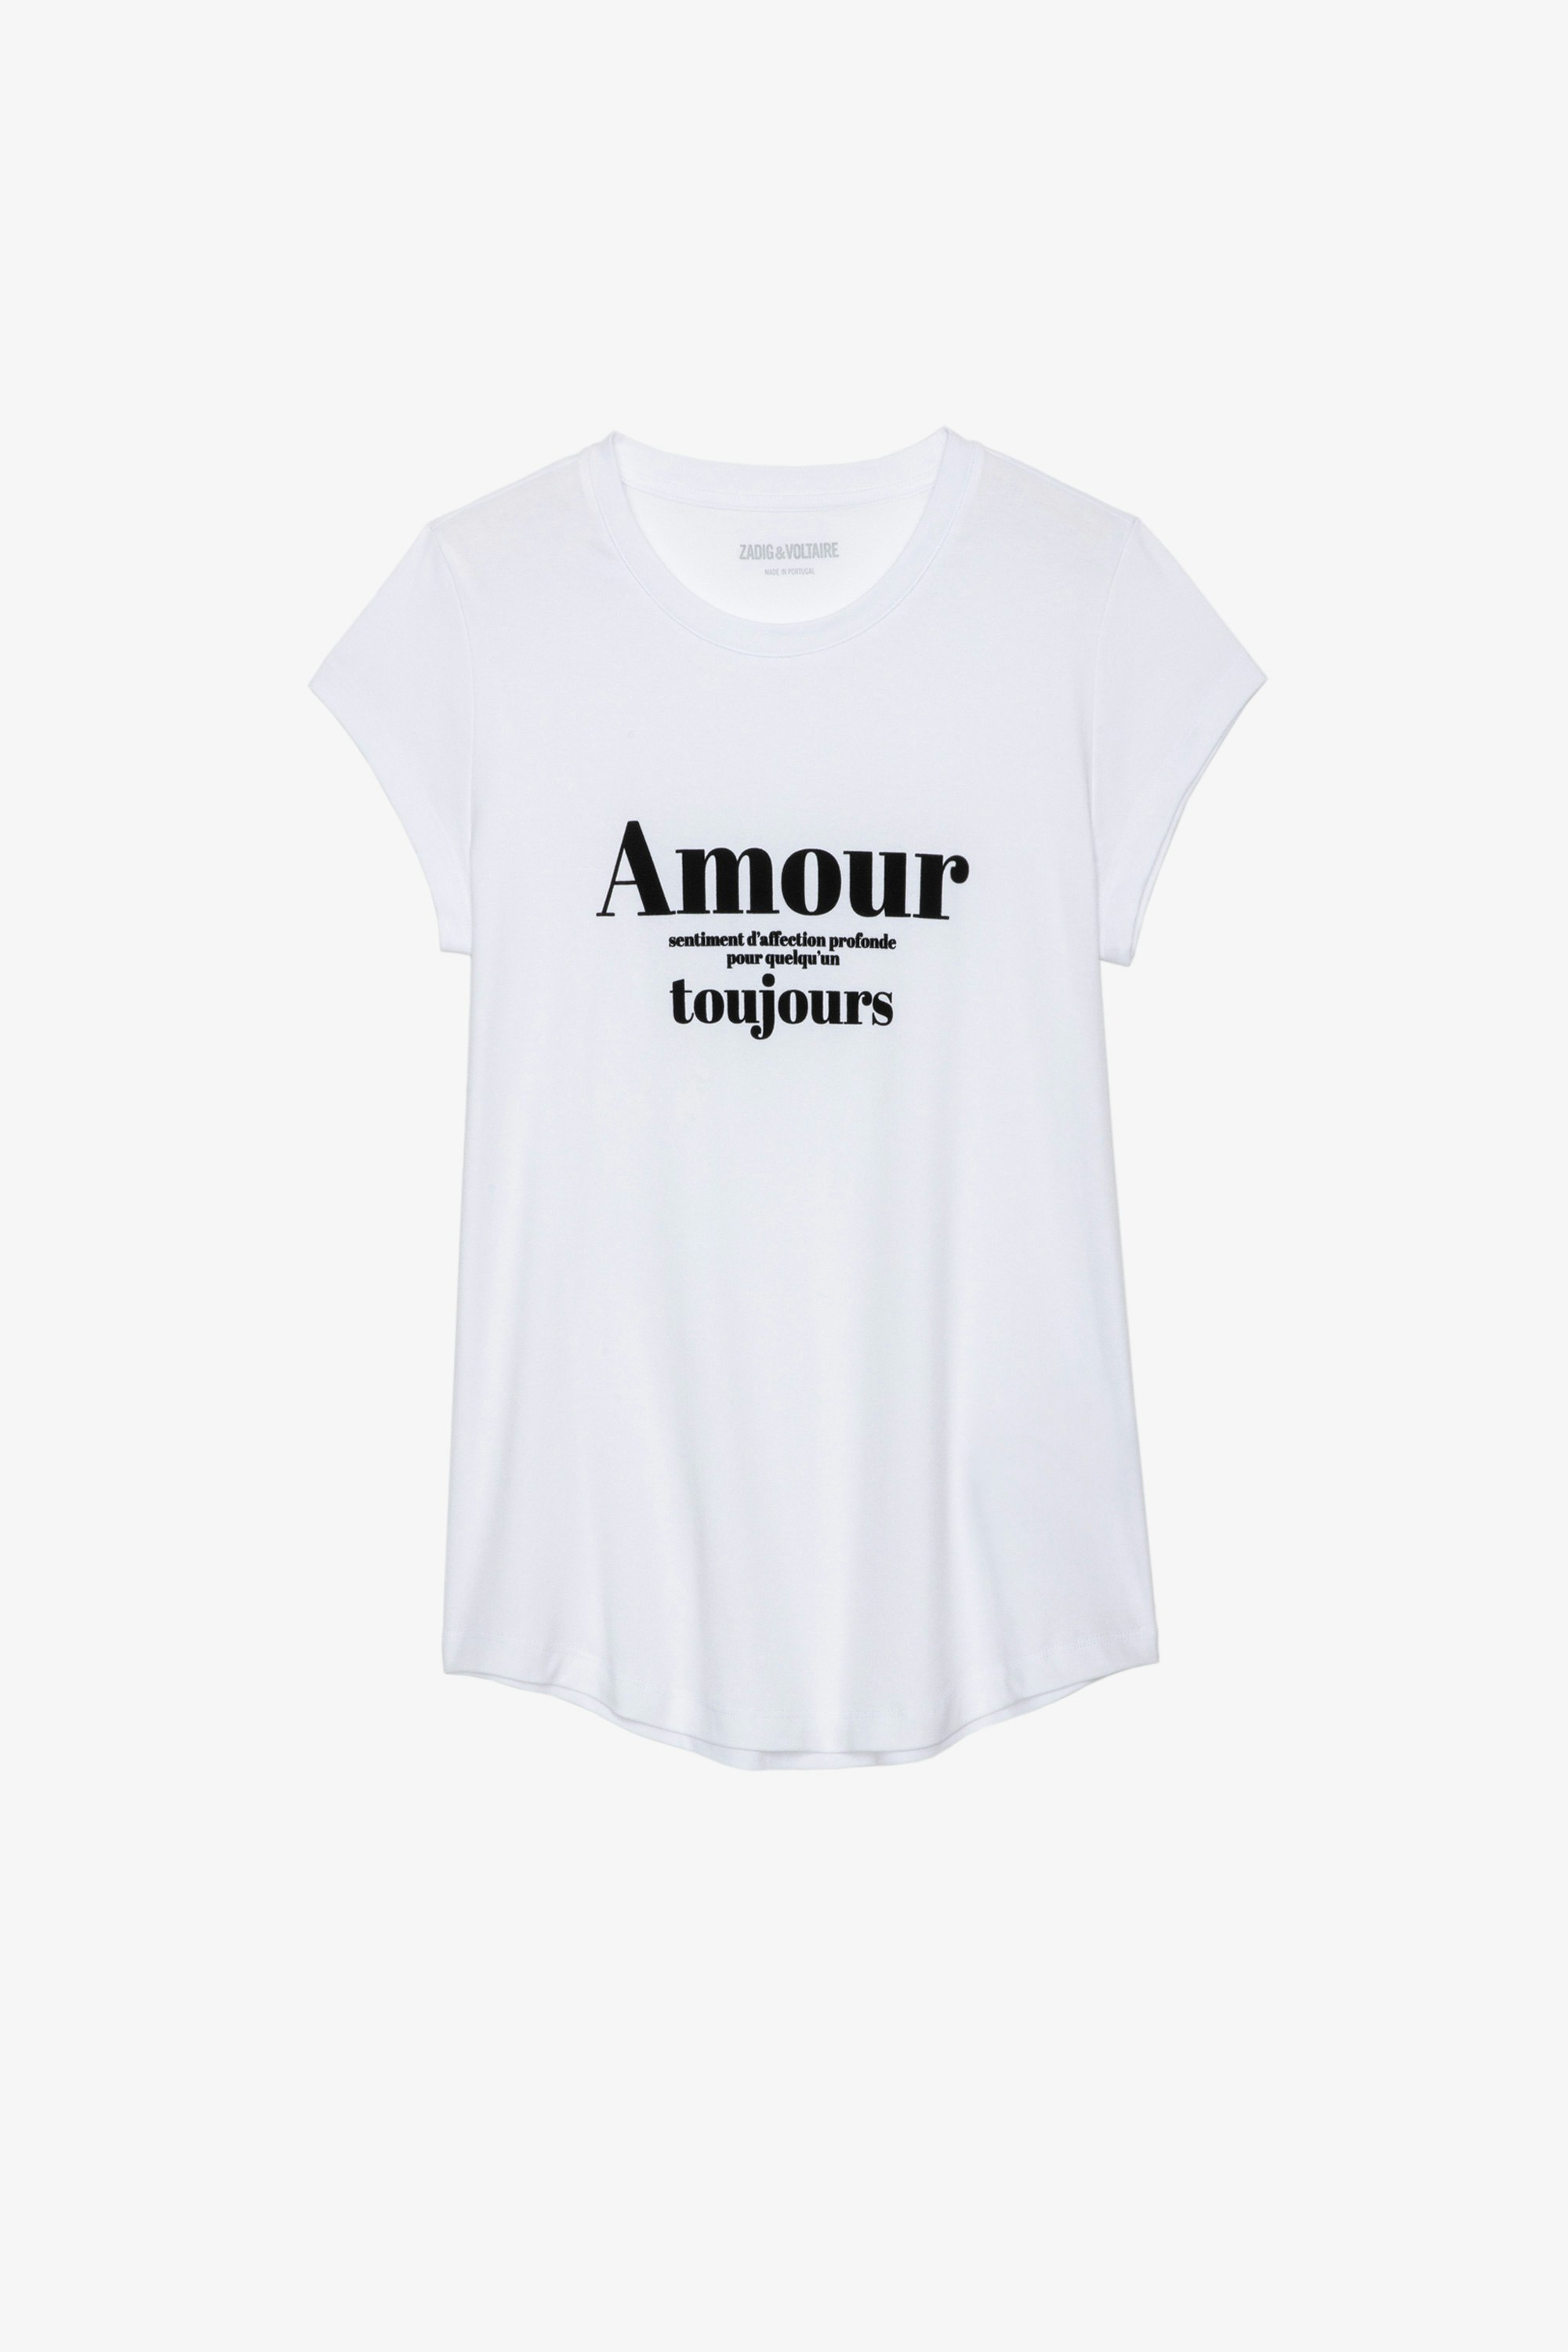 T-shirt Skinny Amour Toujours T-shirt in cotone bianco con stampa “Amour Toujours” a contrasto, Donna